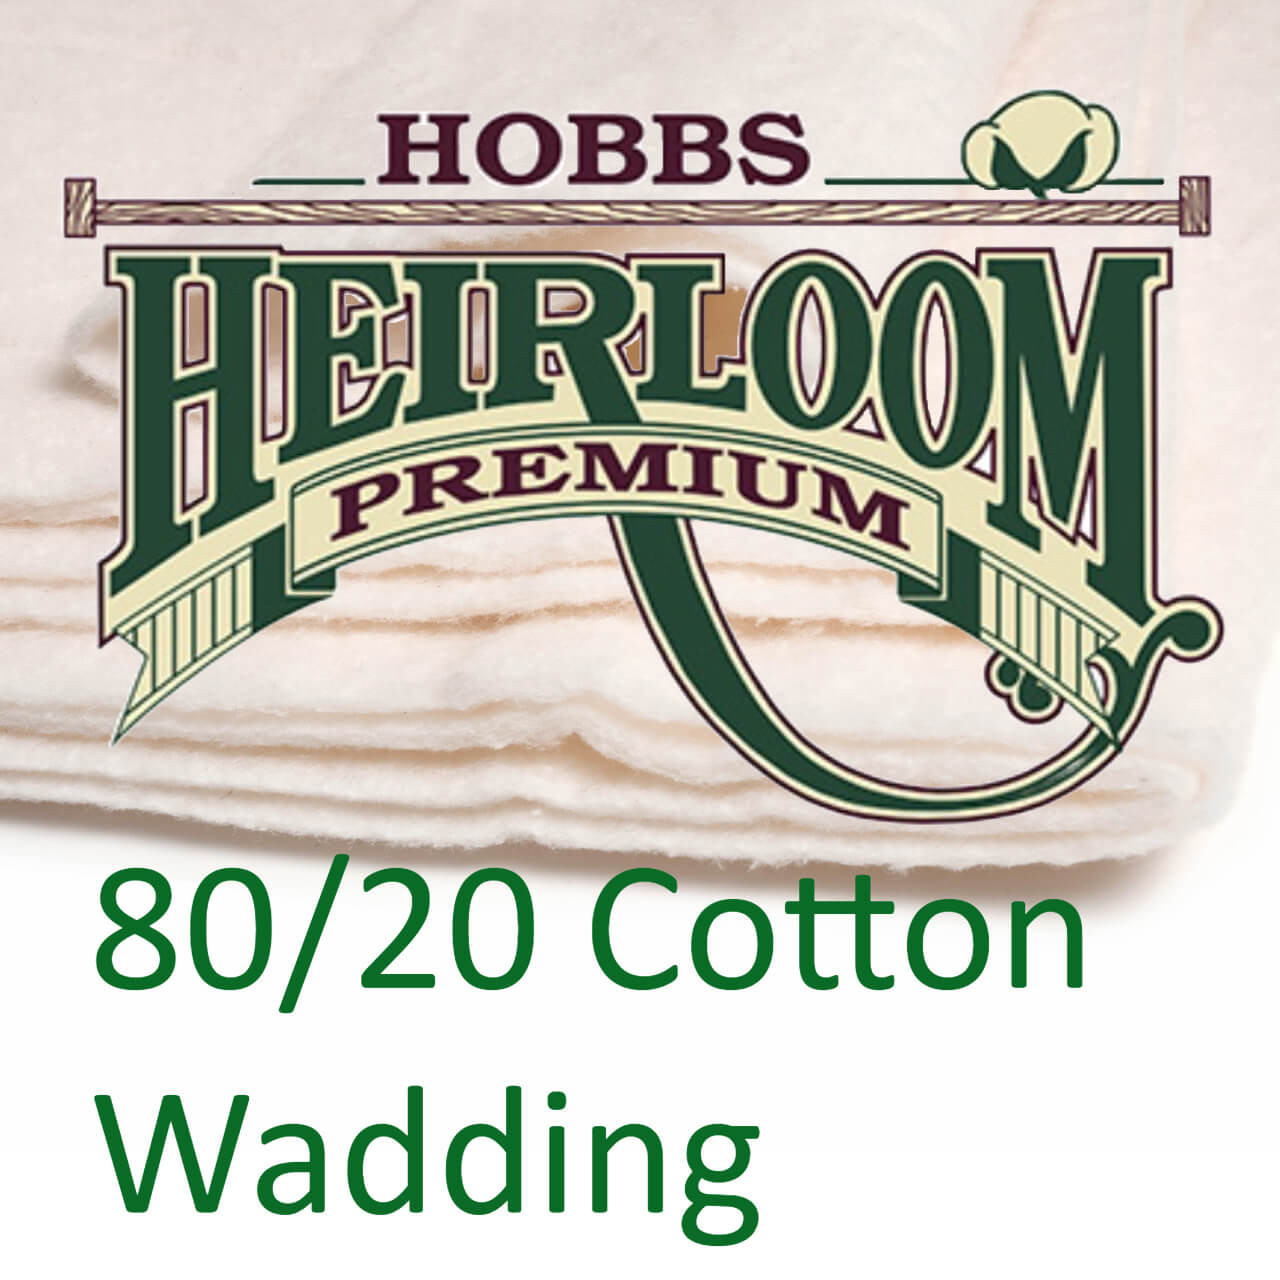 Promotional image featuring Hobbs Heirloom Premium 80/20 Cotton Wadding. The brand's logo is displayed at the top in an elegant font with a classic cotton boll illustration. Below the logo, the product is specified in bold green lettering, emphasizing the 80% cotton and 20% blend composition. In the background, the layered cotton wadding is partially visible, suggesting the quality and texture of the material, ideal for crafting and quilting enthusiasts.